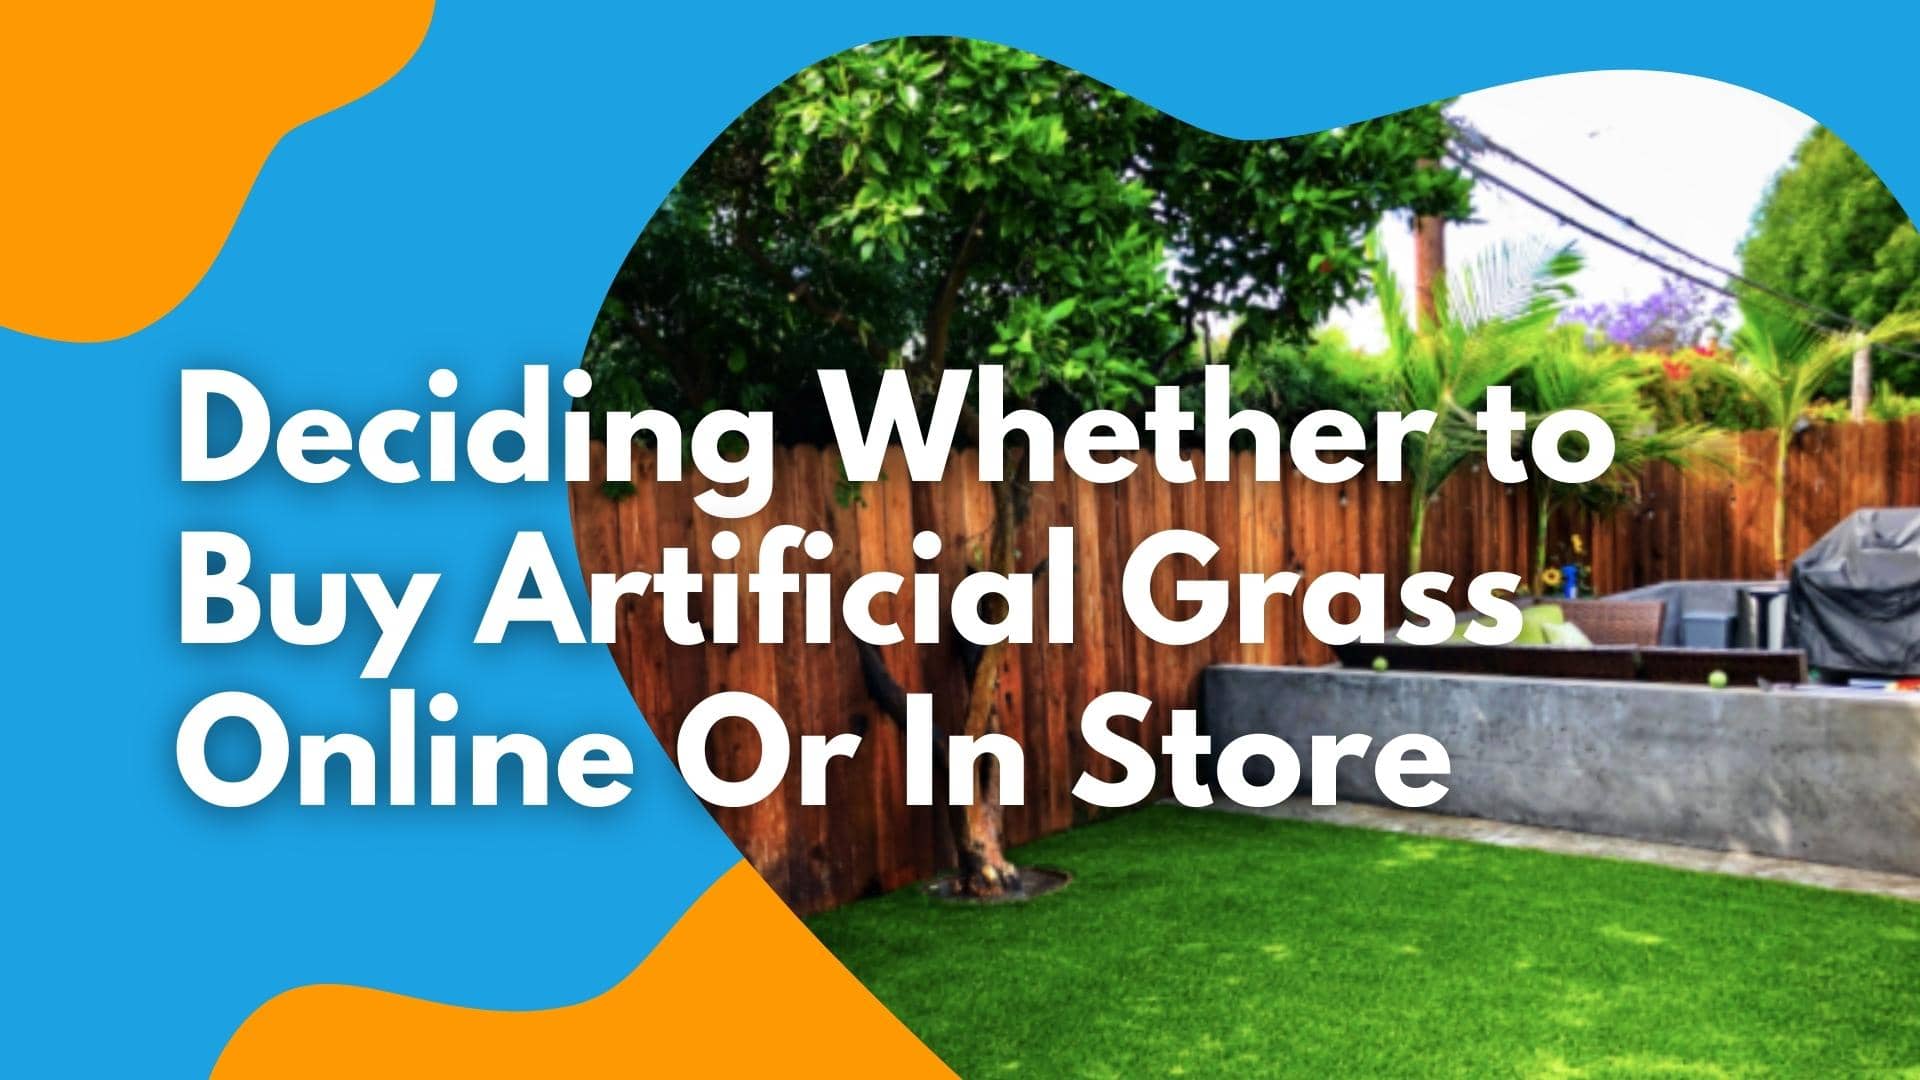 Deciding Whether to Buy Artificial Grass Online or In Store